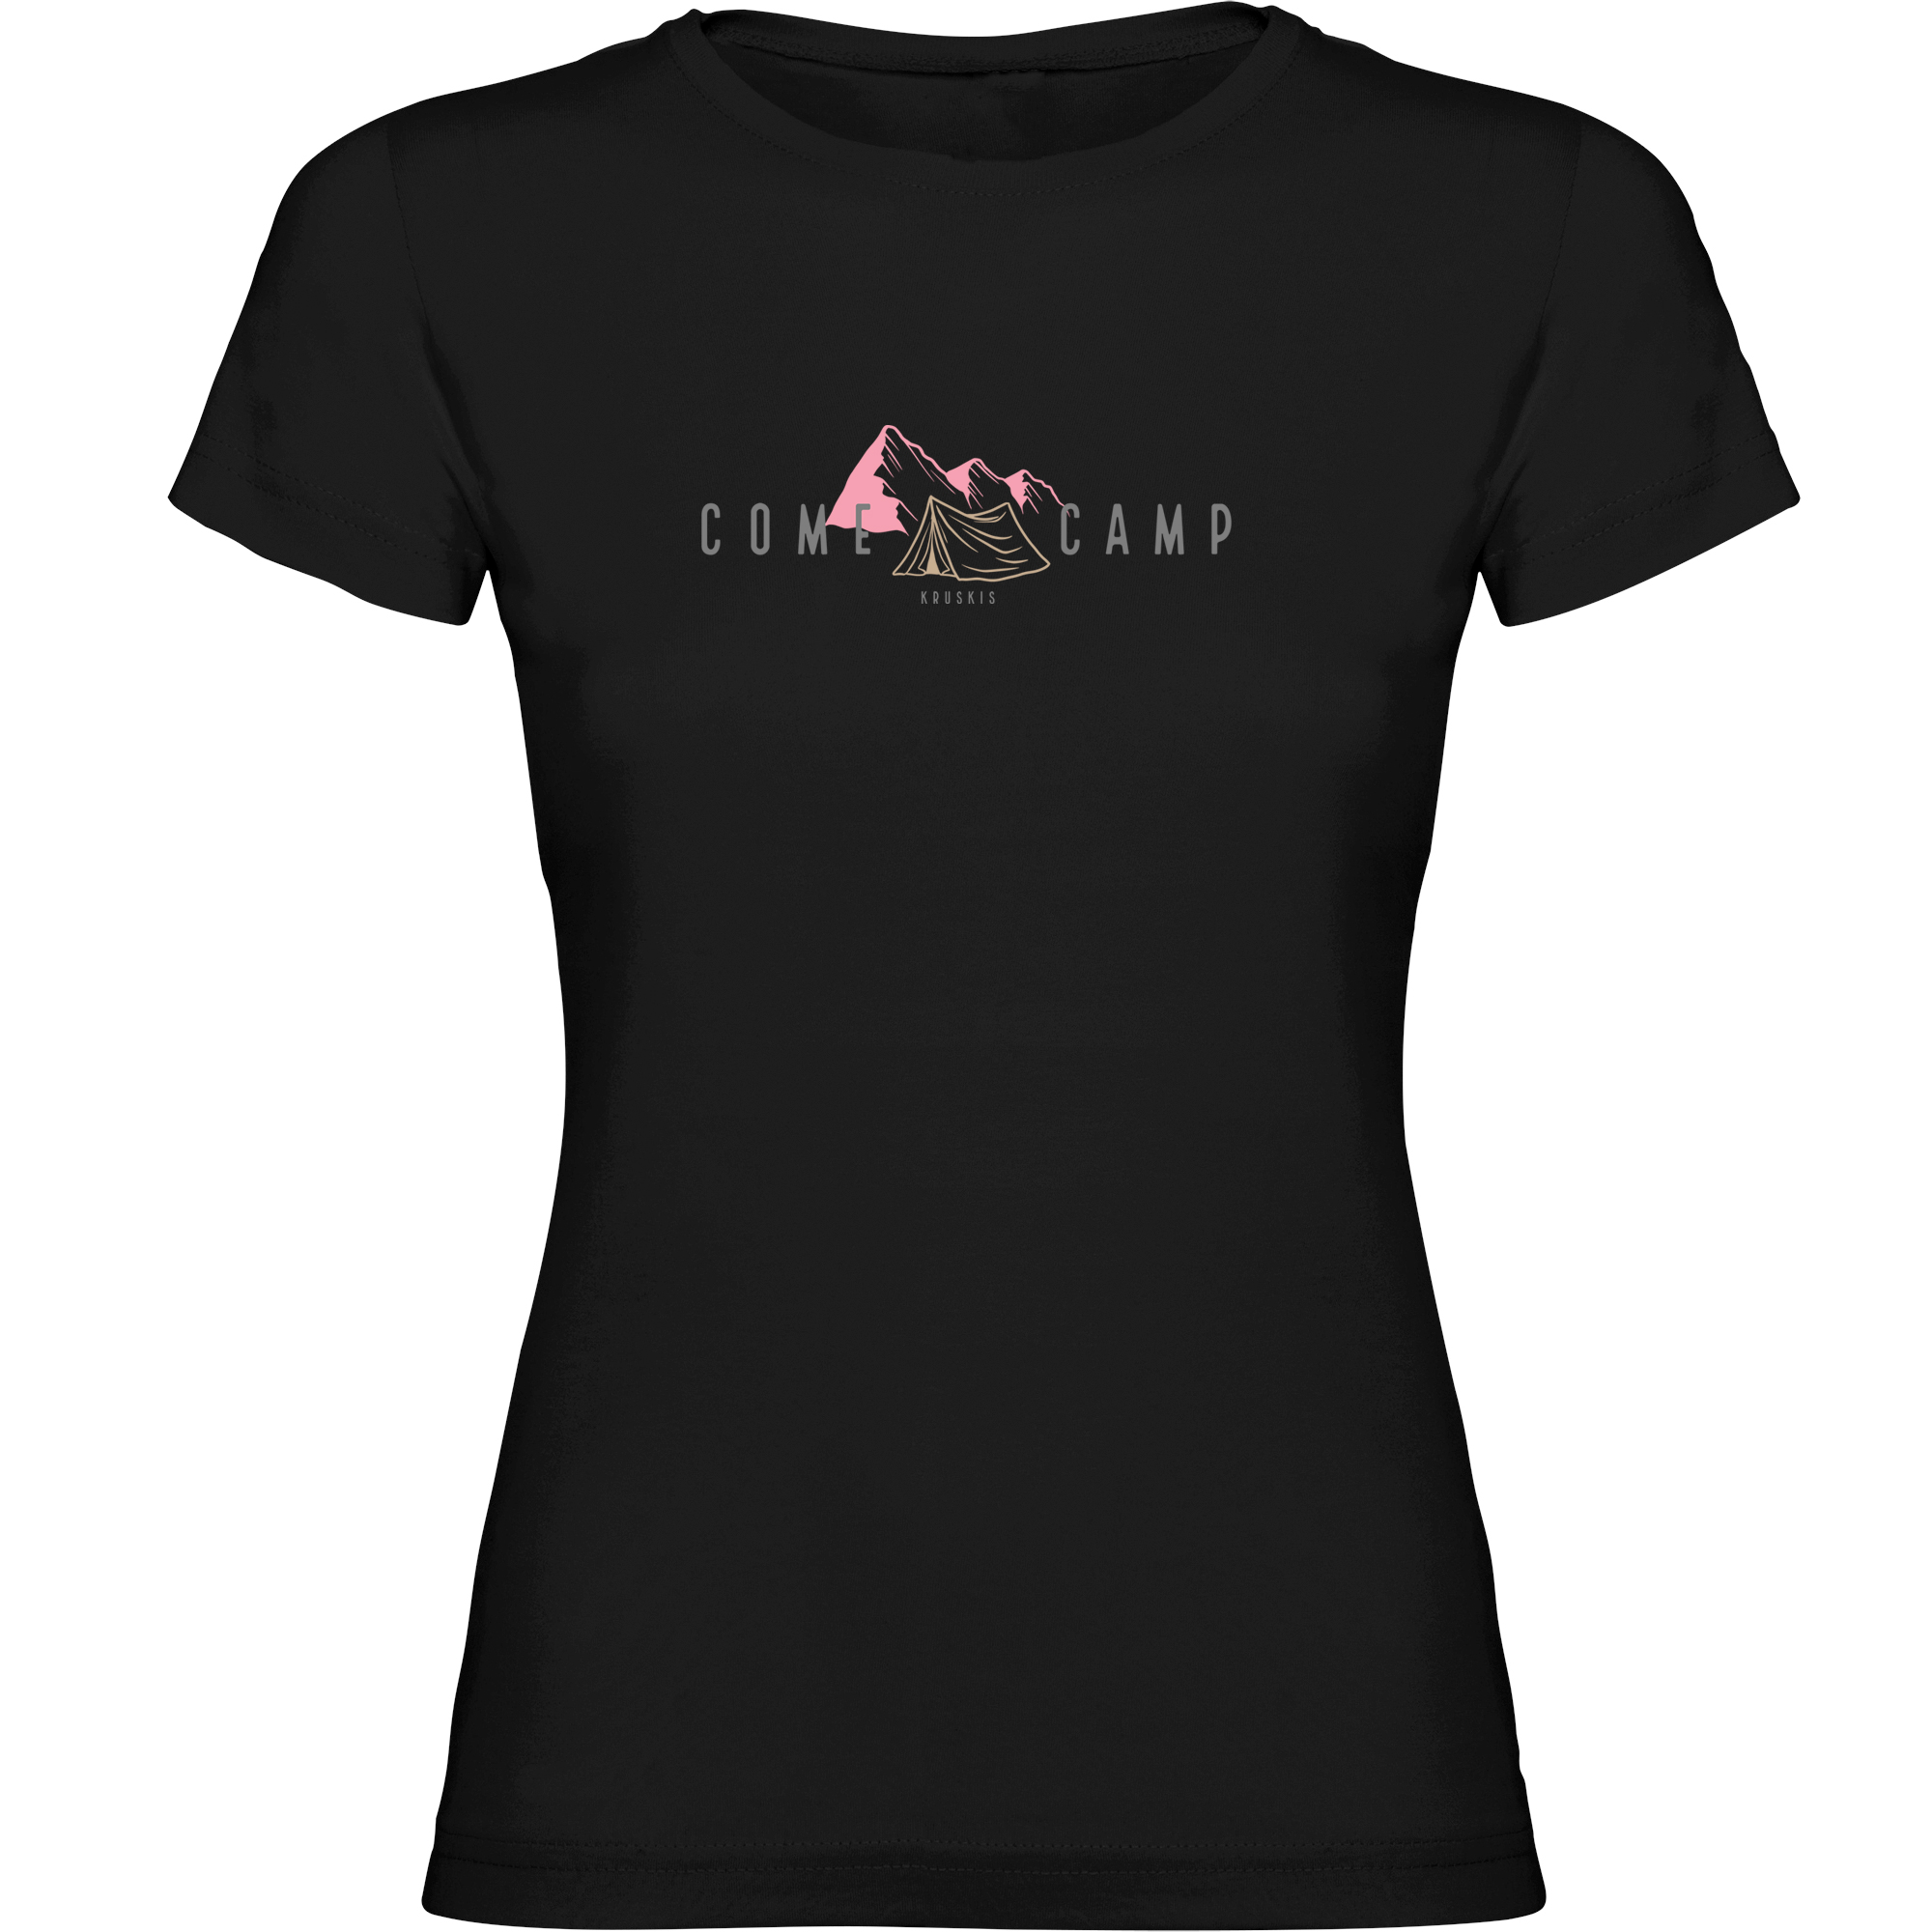 T Shirt Trekking Come and Camp Manica Corta Donna